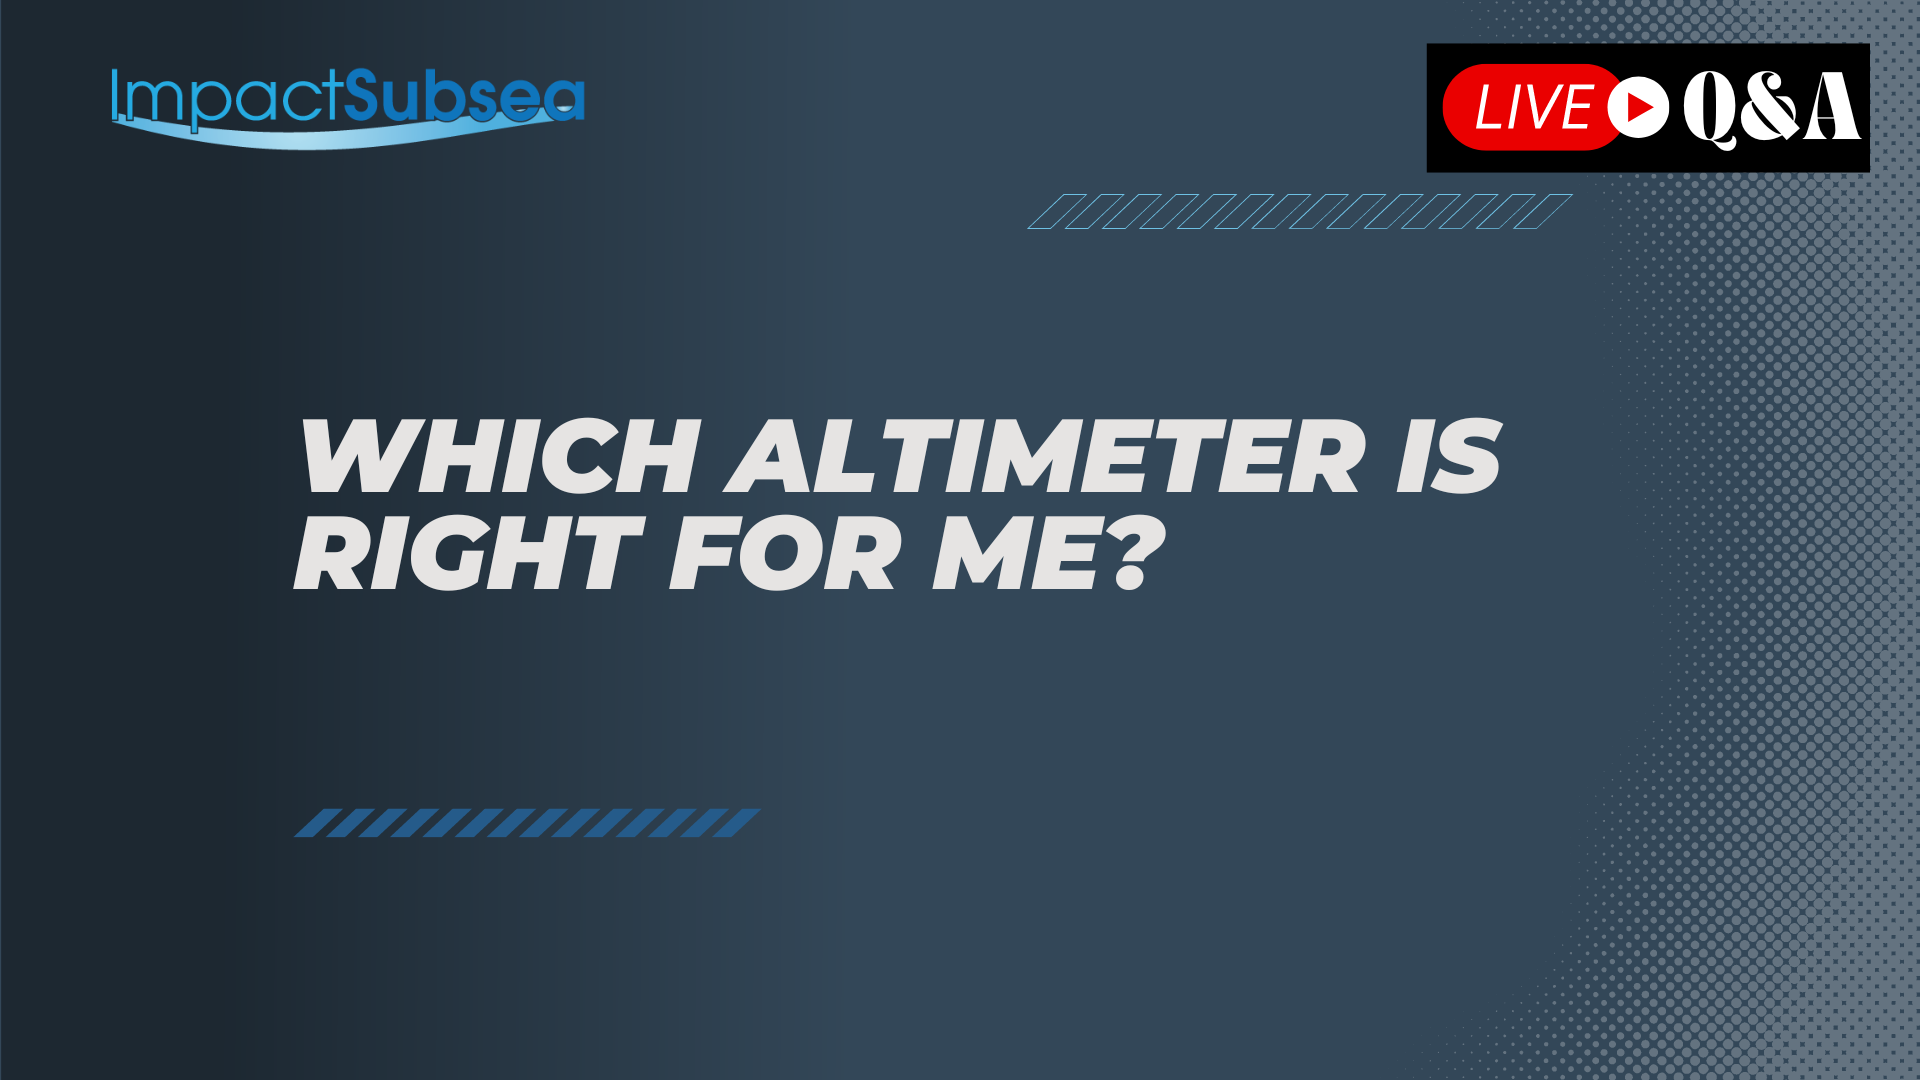 Which altimeter is right for me?